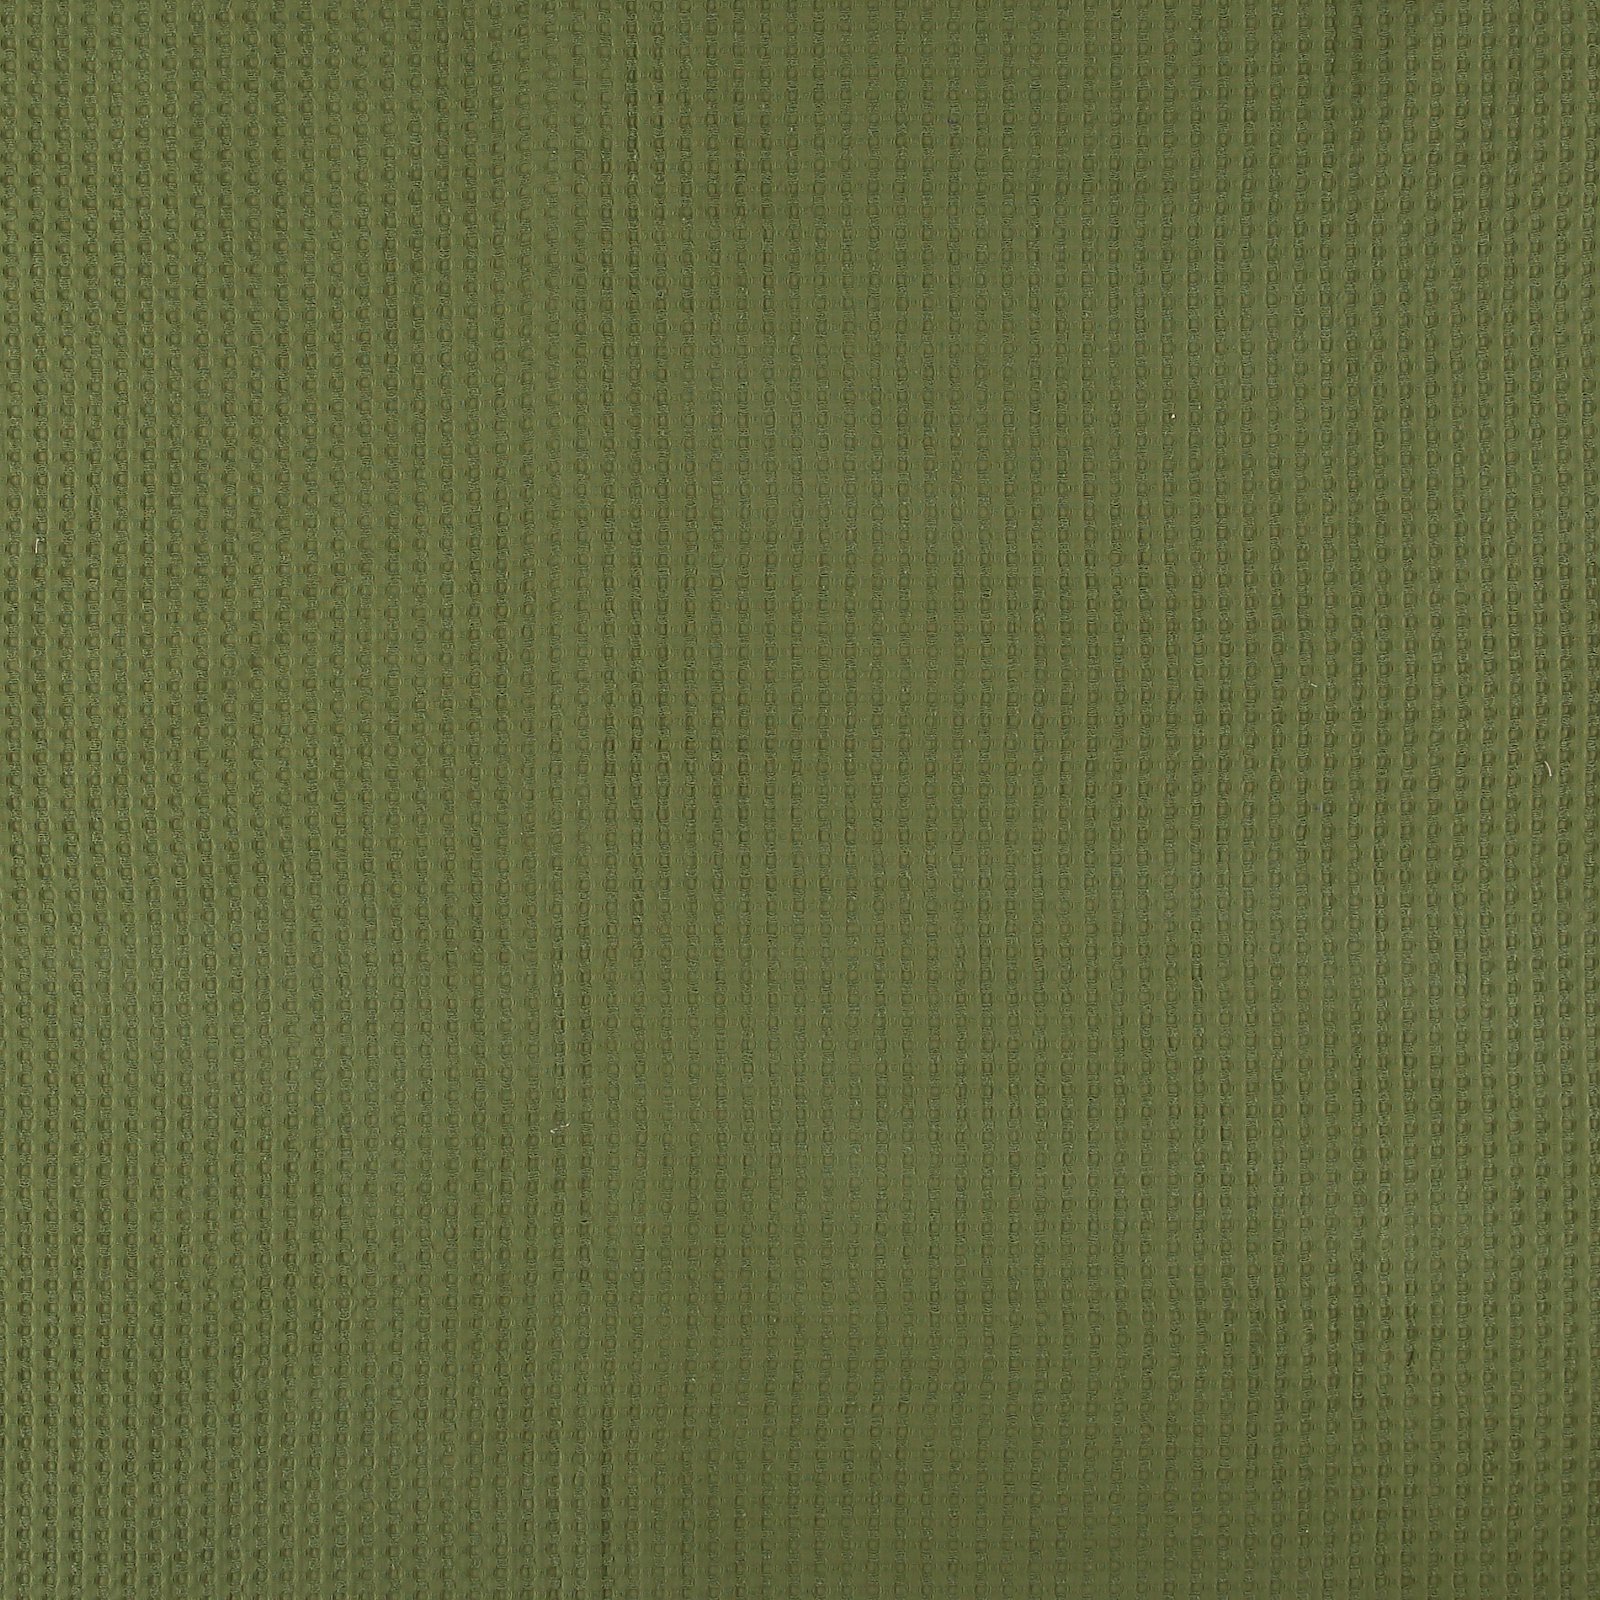 Woven jacquard army green w structure 501790_pack_sp